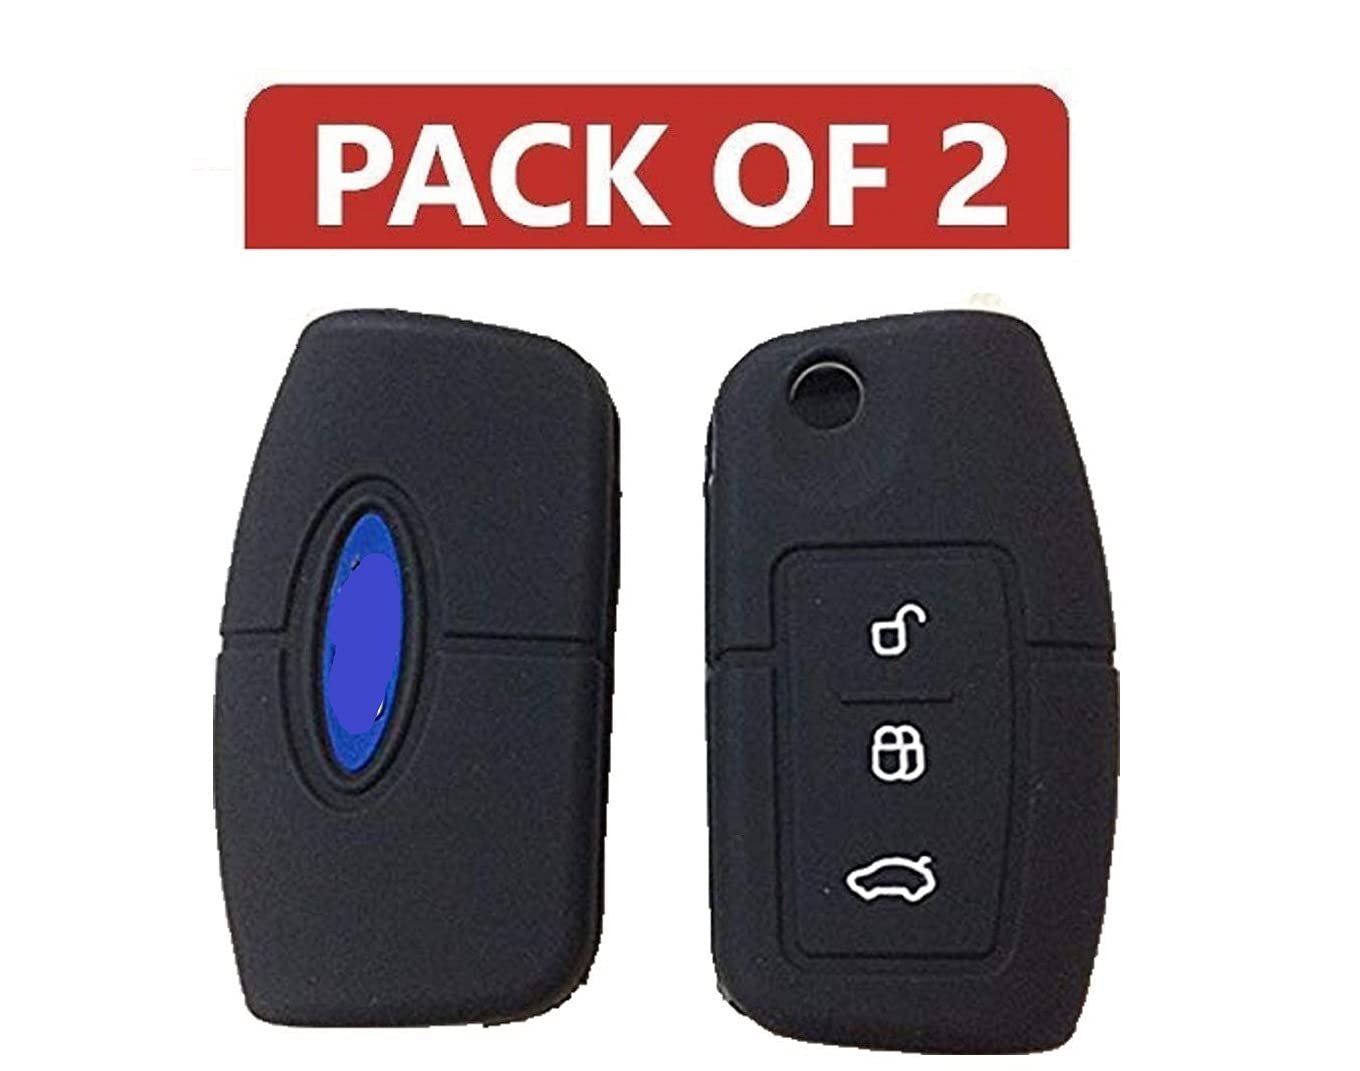 Silicone Flip Key Cover Compatible with Ford Ecosports Fiesta (not For Push Button Start) (Black, Pack of 2) Image 